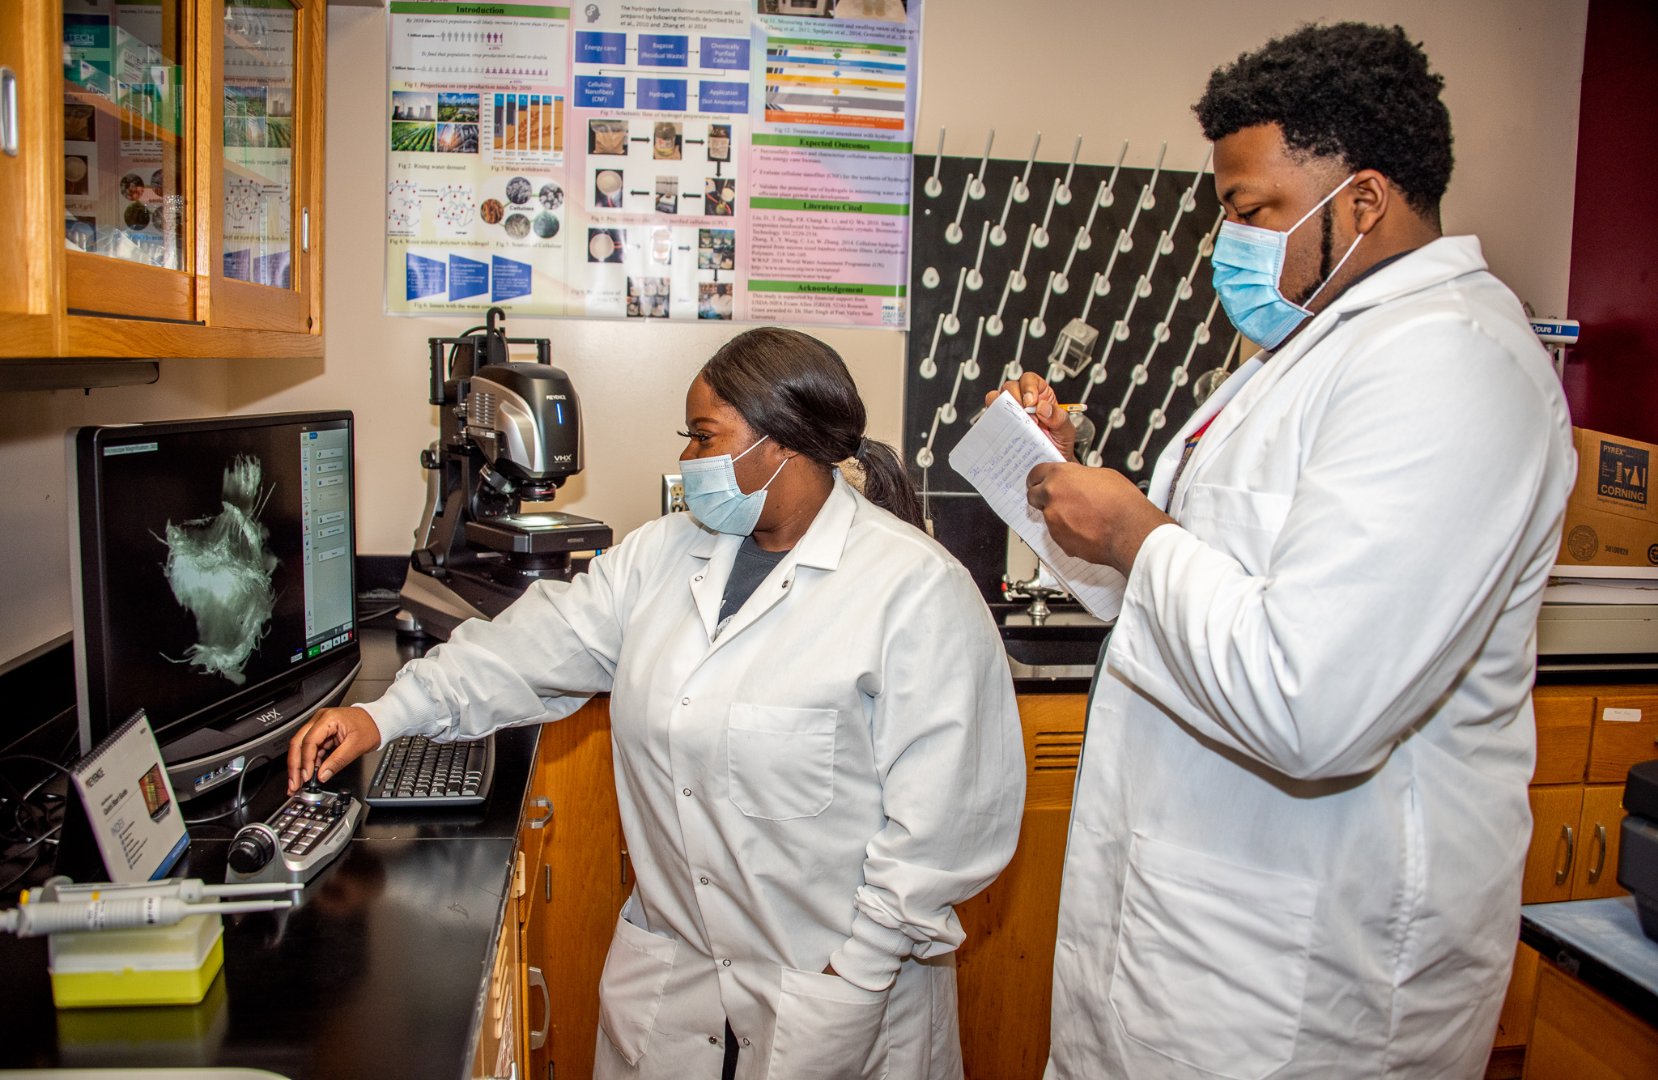 Fort Valley State University biotechnology graduate students Arlese Owens and Jacquez Smith operate an advanced digital microscope for nanotechnology research.